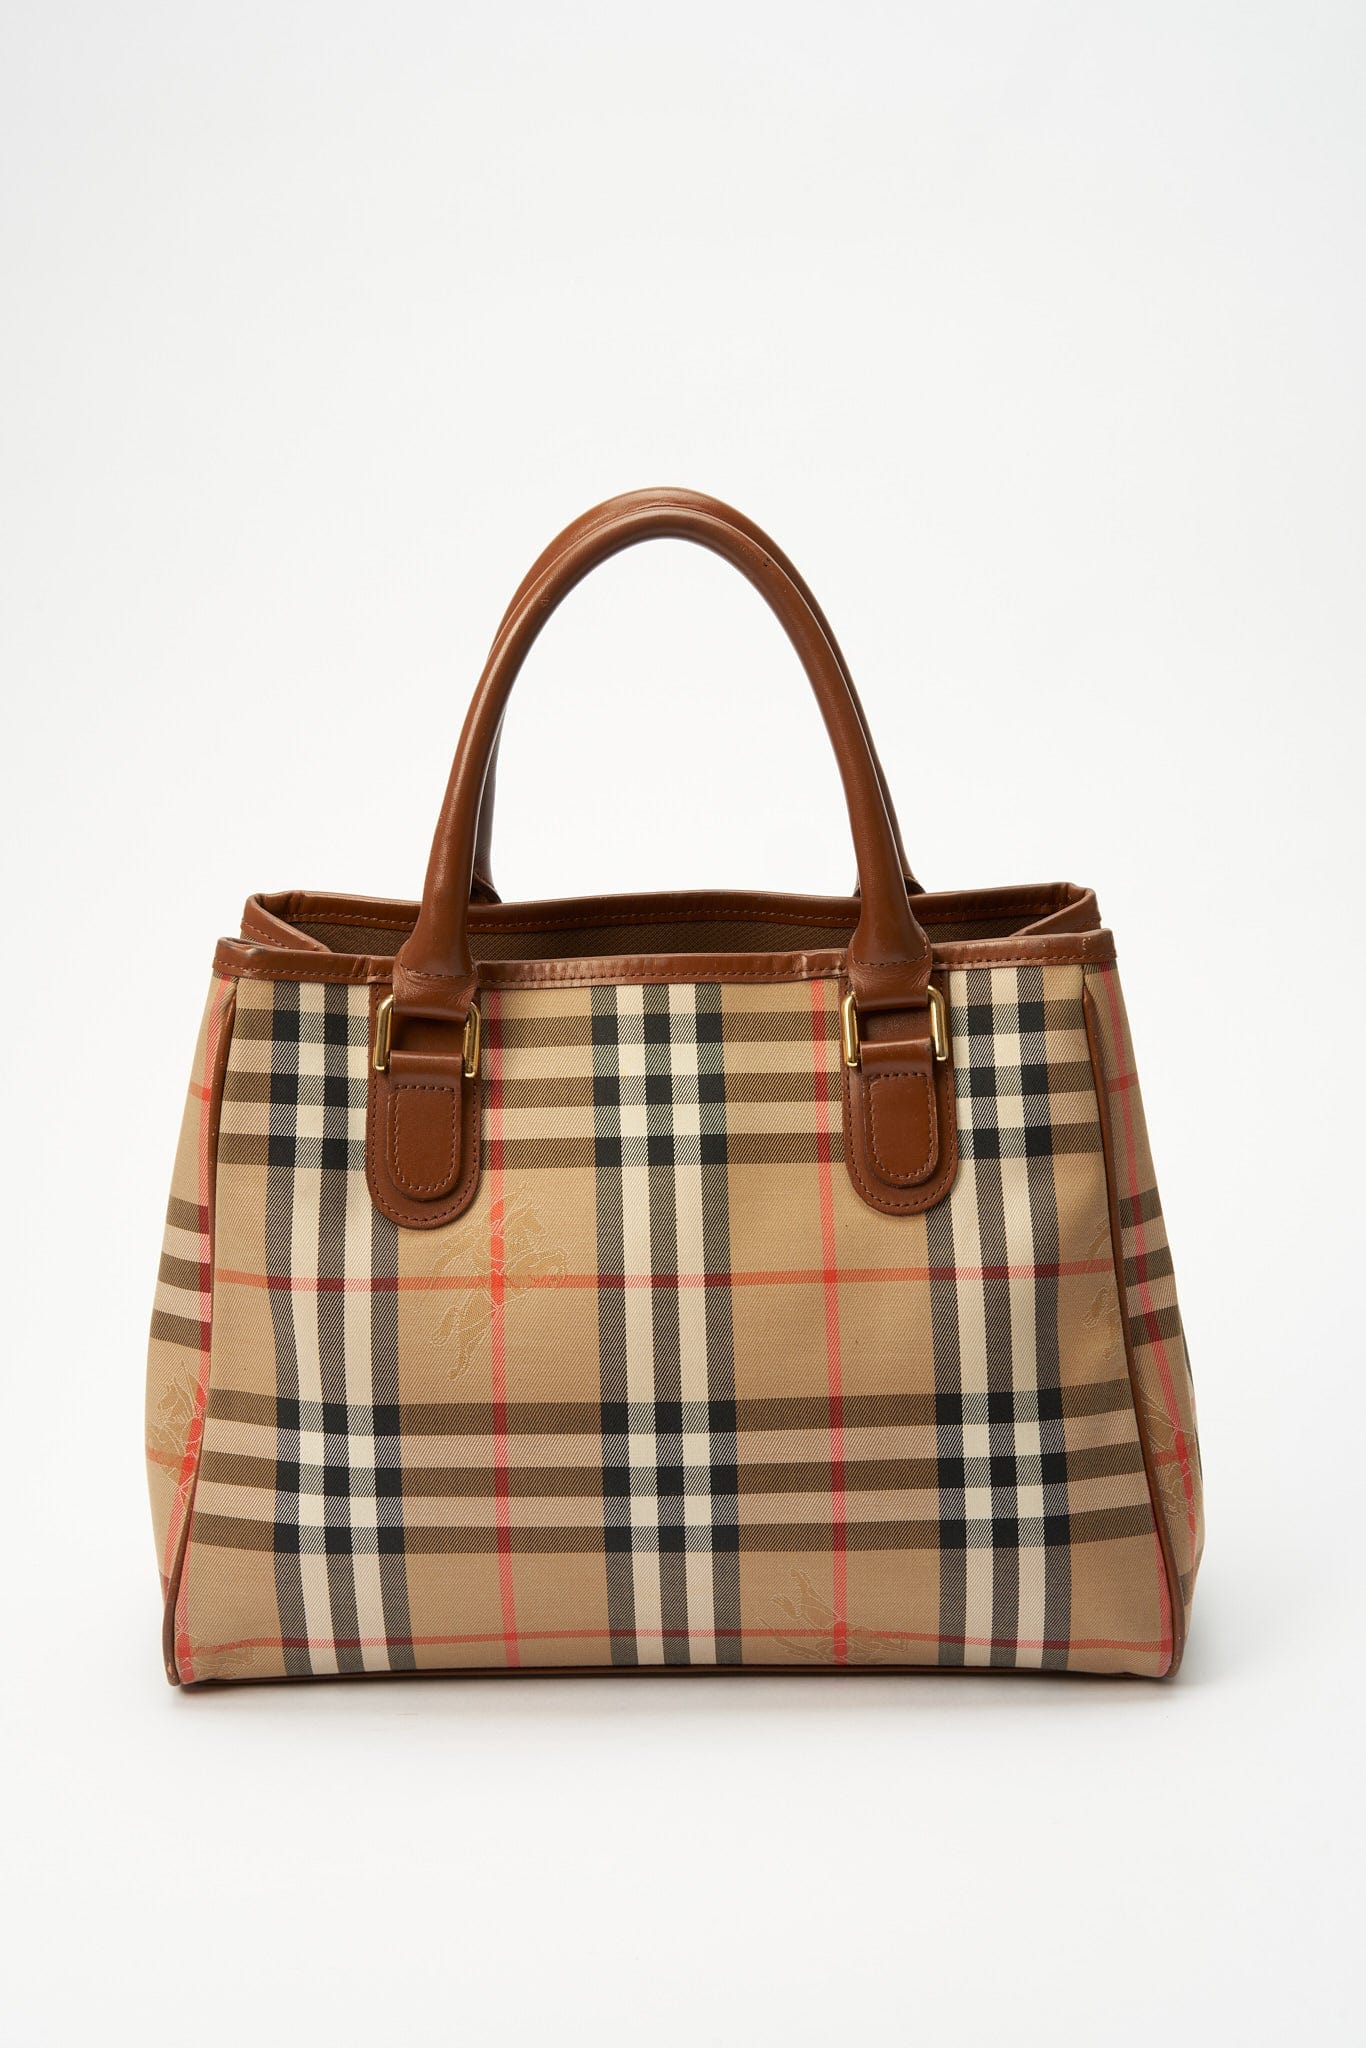 Burberry, Bags, Vintage Burberry Tote In Haymarket Check With Red Strap  And Trim